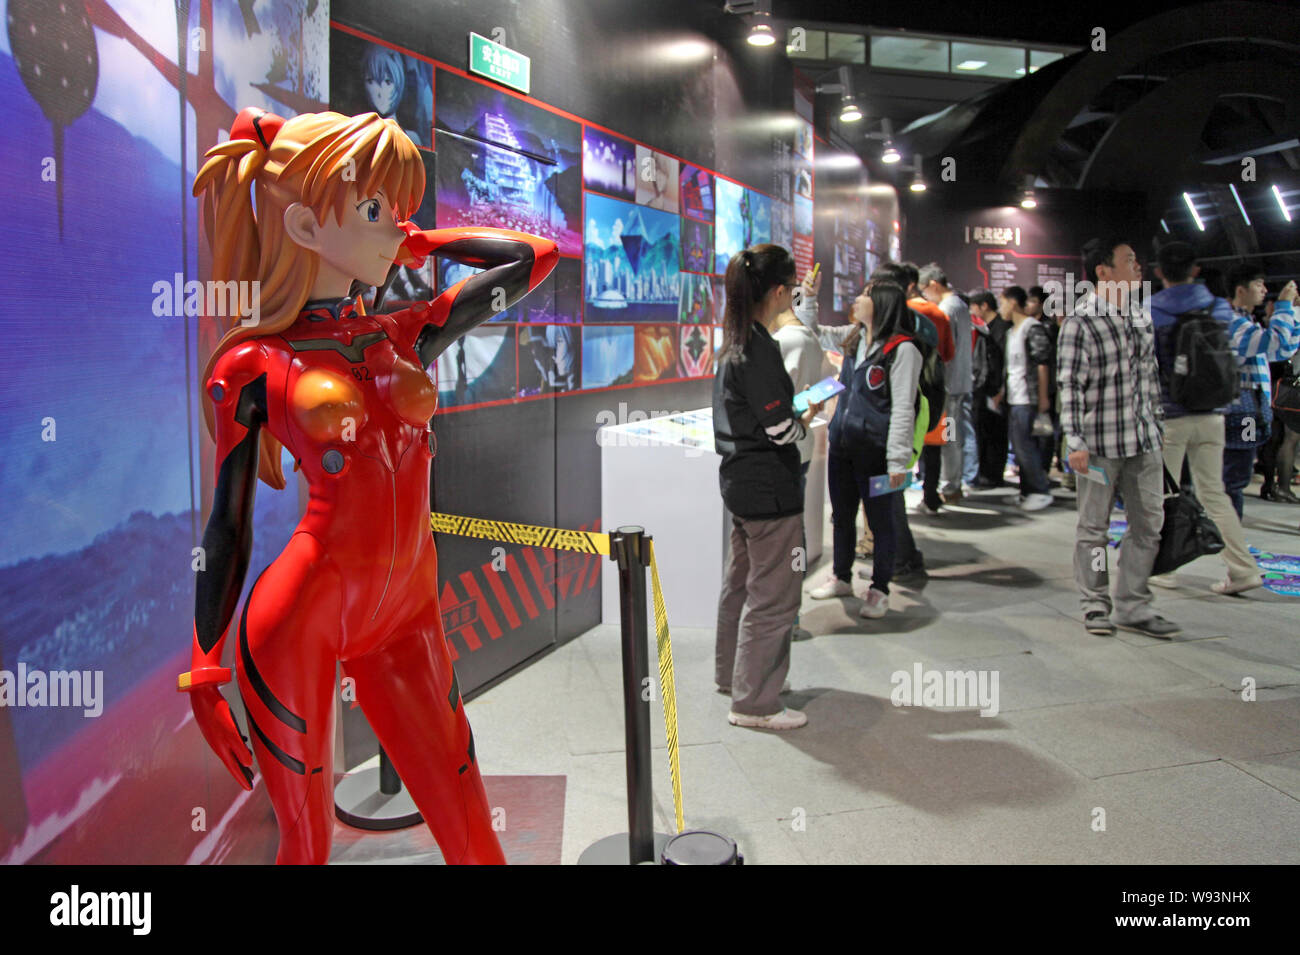 A life-size model of Asuka Langley Soryu, a fictional character from the Neon Genesis Evangelion anime series, is displayed during the EVA Expo at the Stock Photo